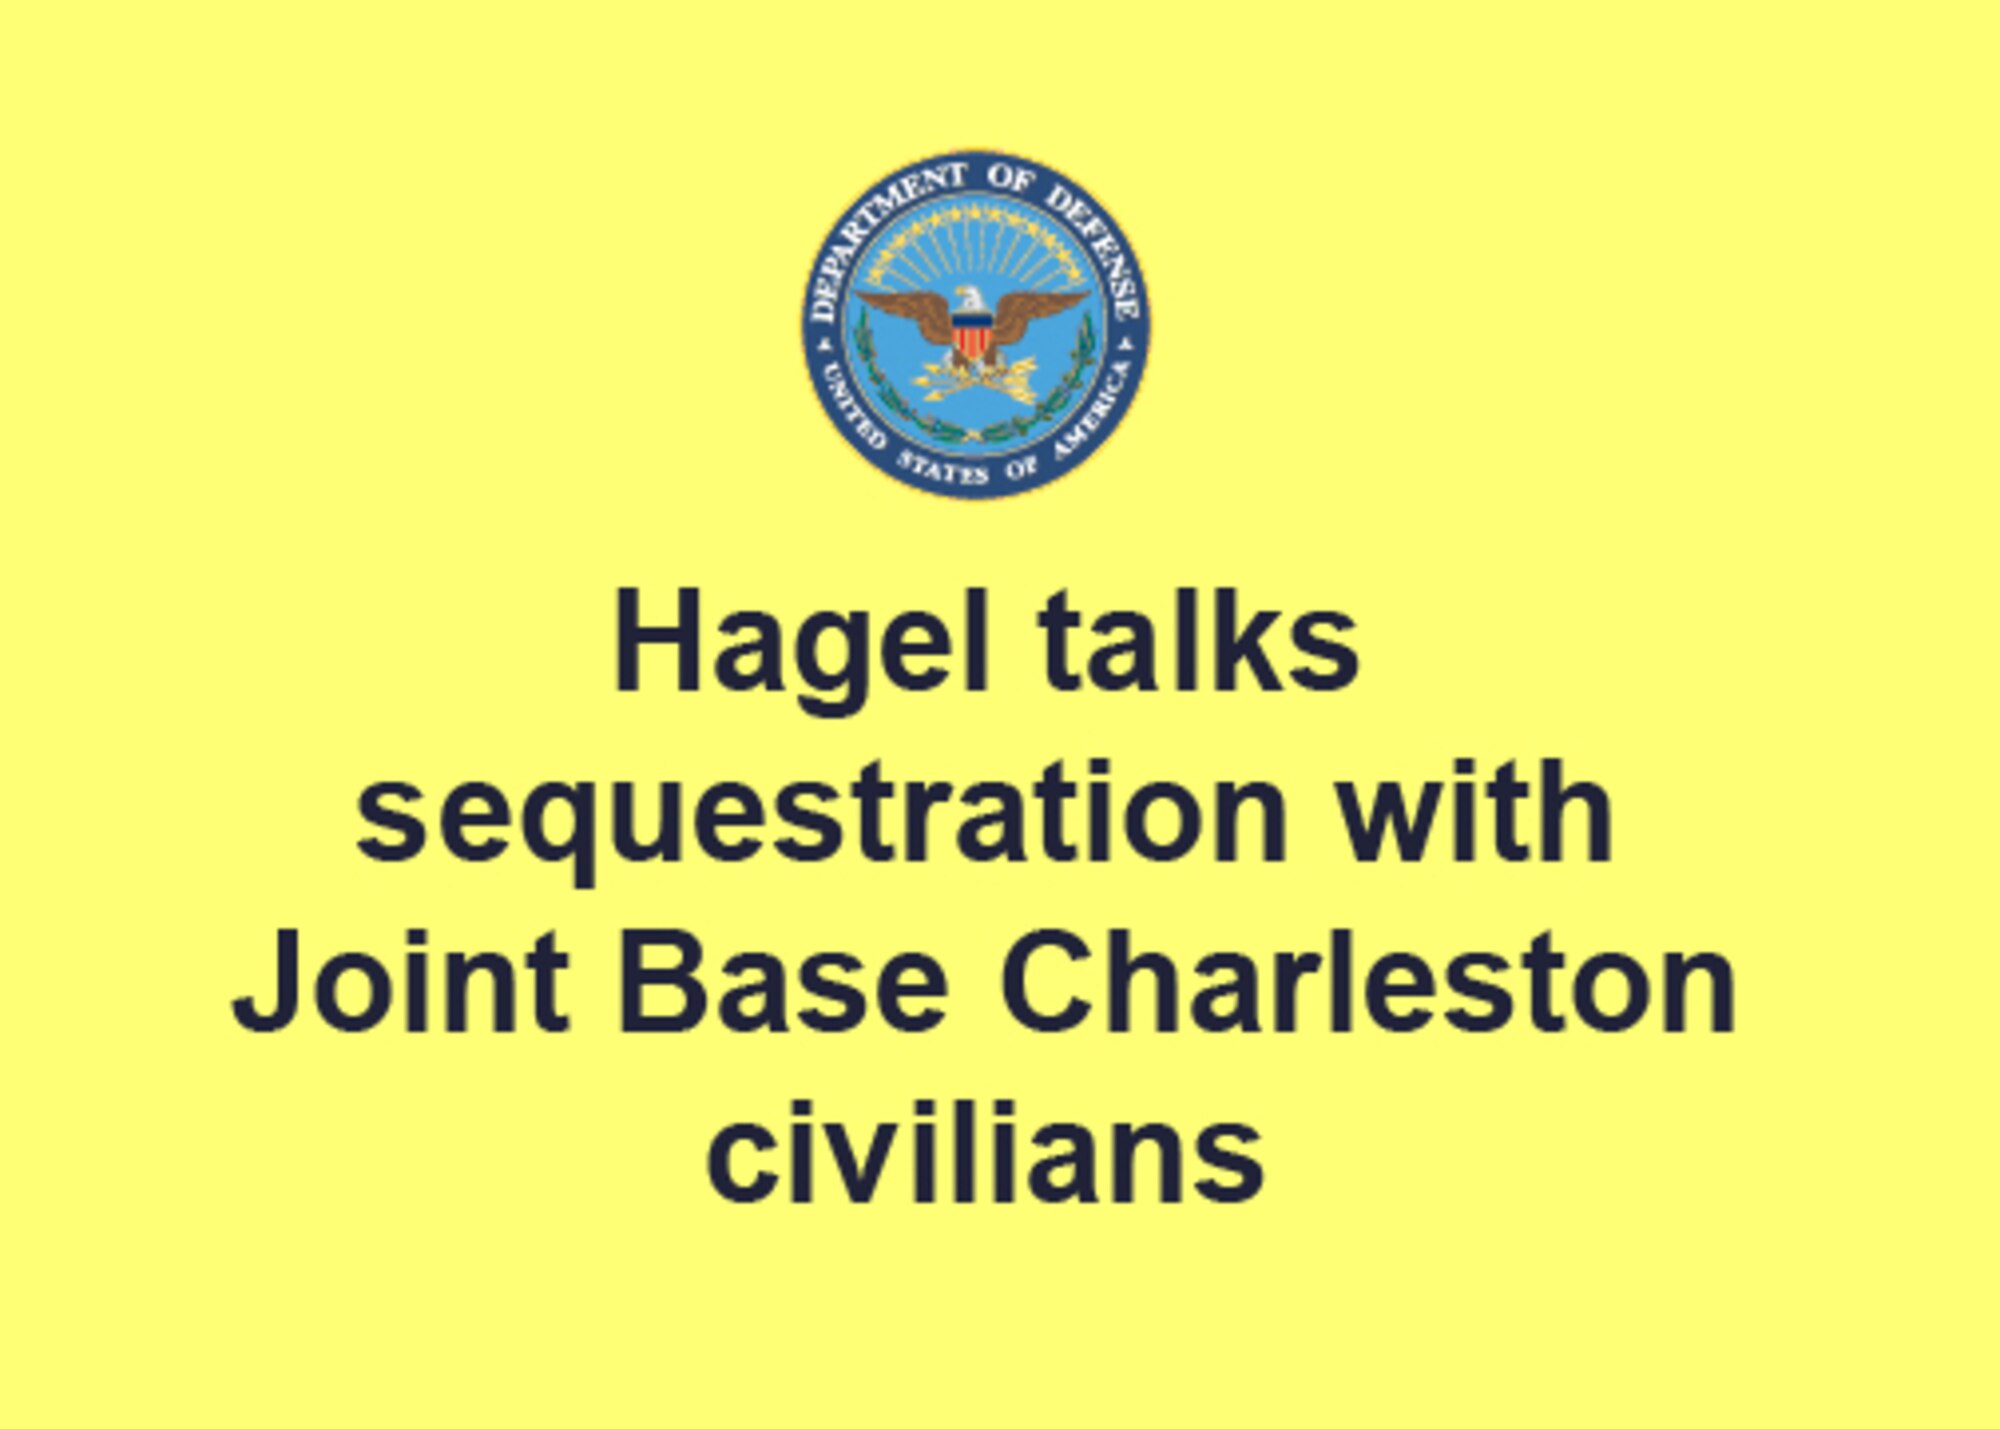 Defense Secretary Chuck Hagel discussed sequestration and defense budget cuts with several hundred Air Force civilian employees at Joint Base Charleston, S.C. at a town hall July 17 at the conclusion of his tour of the base.